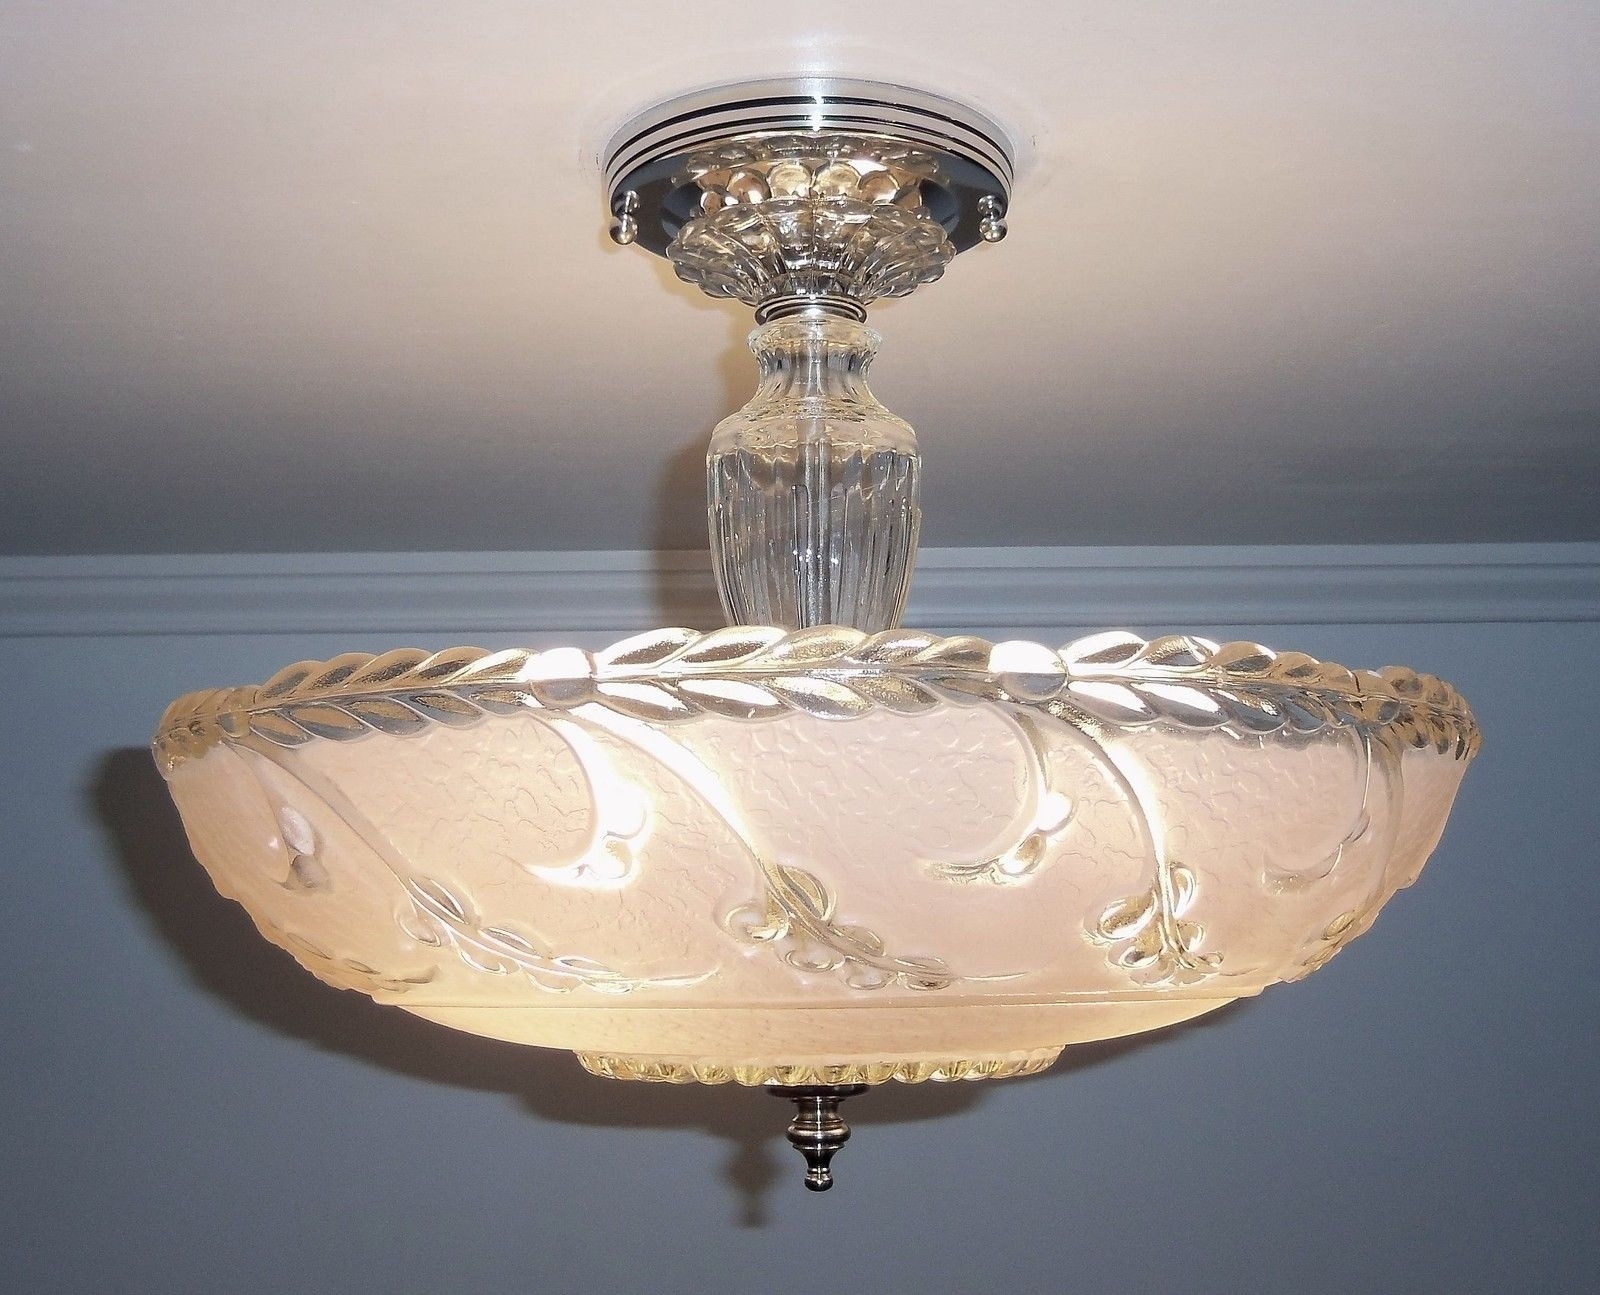 Old Style Ceiling Light Fixtures